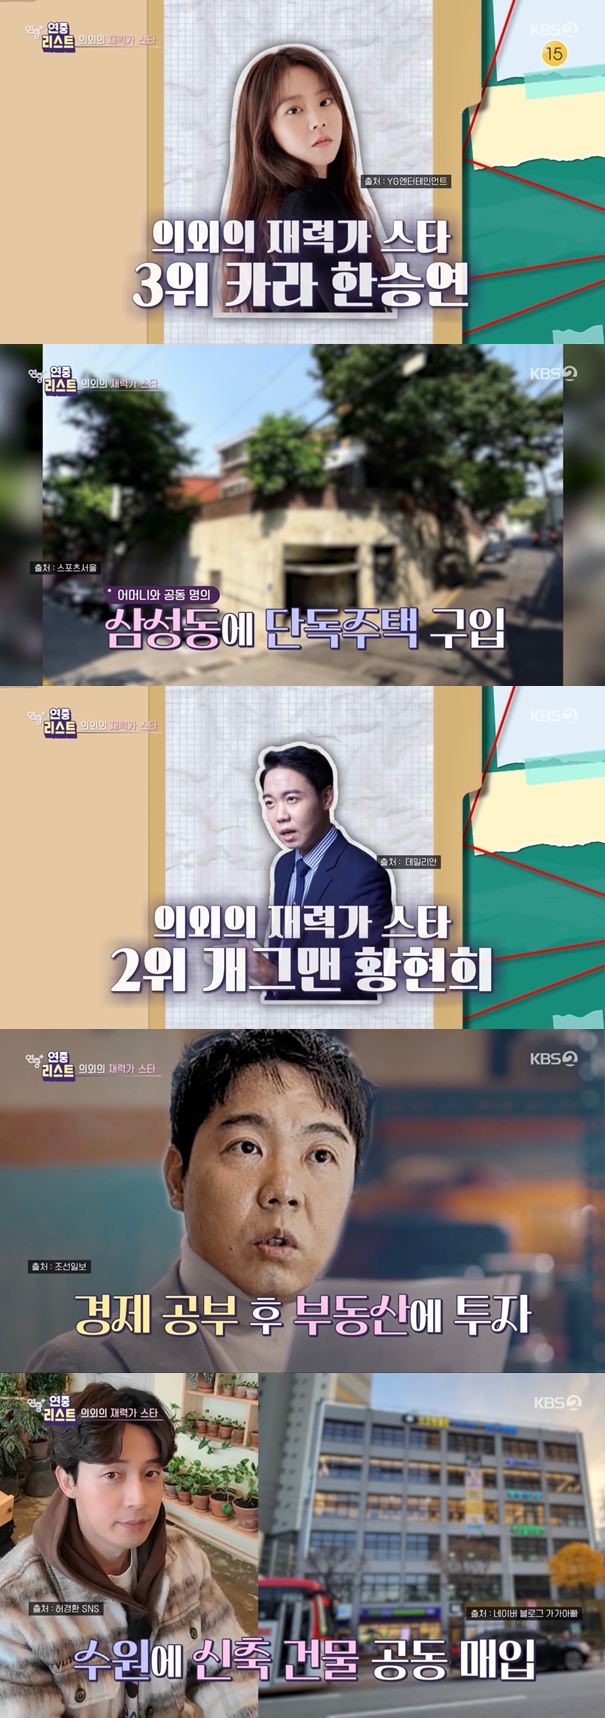 On KBS 2TV year-round plus broadcast on the 16th, the ranking of the unexpected power star of the entertainment industry was revealed.Jang Sung-kyu, an announcer, ranked fifth on the list. Jang Sung-kyu has set up an apartment in Gangdong-gu within three years of becoming a broadcaster.In addition to this, Jang Sung-kyu is known to have owned a building in Cheongdam-dong, Gangnam-gu, owned by the company he represents. The real estate agent caught the eye by saying, At present, it is more than 10 billion won.In addition, Jang Sung-kyu said on the radio in the past, The tax accountant said that (comprehensive income tax) could come out in billions. Isnt this supposed to be 50 percent? Thats why he said he could pay 100 million won.In the fourth place, Comedian Kim Jung-ryul, who is famous for Sungguri Party, was named. Kim Jung-ryul appeared on Choi Yang-raks YouTube in the past and bought Sungguri PartyI invested 50,000 won and earned hundreds of billions of dollars. He also said that he earned 100 million won a night during the prime of his reign.Since then, Kim Jung-ryul has invested all of his profits in the land, then sold the land where the price has risen and bought the building.Han Seung-yeon won the third place among the KARA members. Han Seung-yeon was called living idol at the beginning of his debut.He started with Honey in 2008 and succeeded to advance to Japan with Mr in 2009, and KARA became the main character of Korean wave craze.Han Seung-yeon was found to have purchased a building in Cheongdam-dong for 4.5 billion won in 2014.The building has been rebuilt and transformed into a new shape. The price of this building is about 15 billion won, said a real estate agent. We are expecting about 20 million won a month.In addition, Han Seung-yeon has set up a single-family house in Samseong-dong in 2017 with his mother. It is estimated that Han Seung-yeon is living in this building after the new construction.The price of this building is seen as more than 16 billion won, a real estate agent said.In second place was Hong Hyun-hee, a 10 billionaire and successful investment expert who entered Yonsei Universitys College of Economics One to start studying again and invested in real estate after two years of study.Since then, Hong Hyun-hee has invested in stocks and bit coins, saying, I earned 10 times the initial investment.Meanwhile, Comedian Heo Kyung-hwan, who turned into a star CEO, took first place.It was Heo Kyung-hwan who started business in 2010, but it was not smooth because he got the record of the Grand Historian to his partner.As a result, Heo Kyung-hwans chicken breast company achieved annual sales of about 60 billion won, and then he co-purchased a new building in Su One, and the real estate agent said, I bought the building for about 8 billion won.The monthly income is estimated to be in the second half of 20 million won. Picture = KBS 2TV broadcast screen